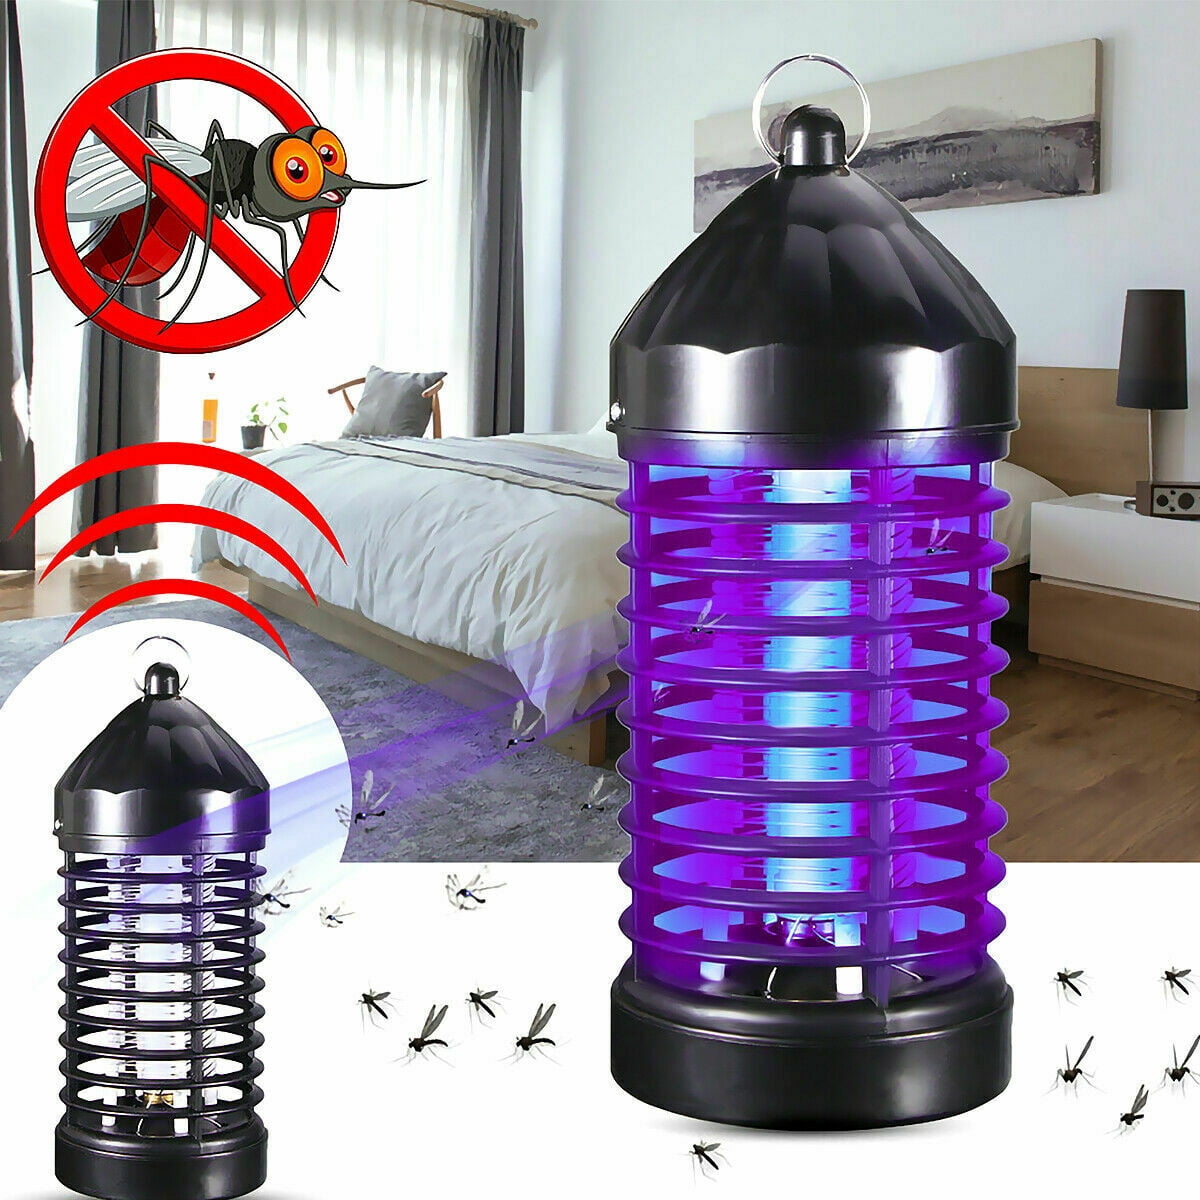 1/2x Electric UV Mosquito Killer Lamp Outdoor/Indoor Fly Bug Insect Zapper Trap 